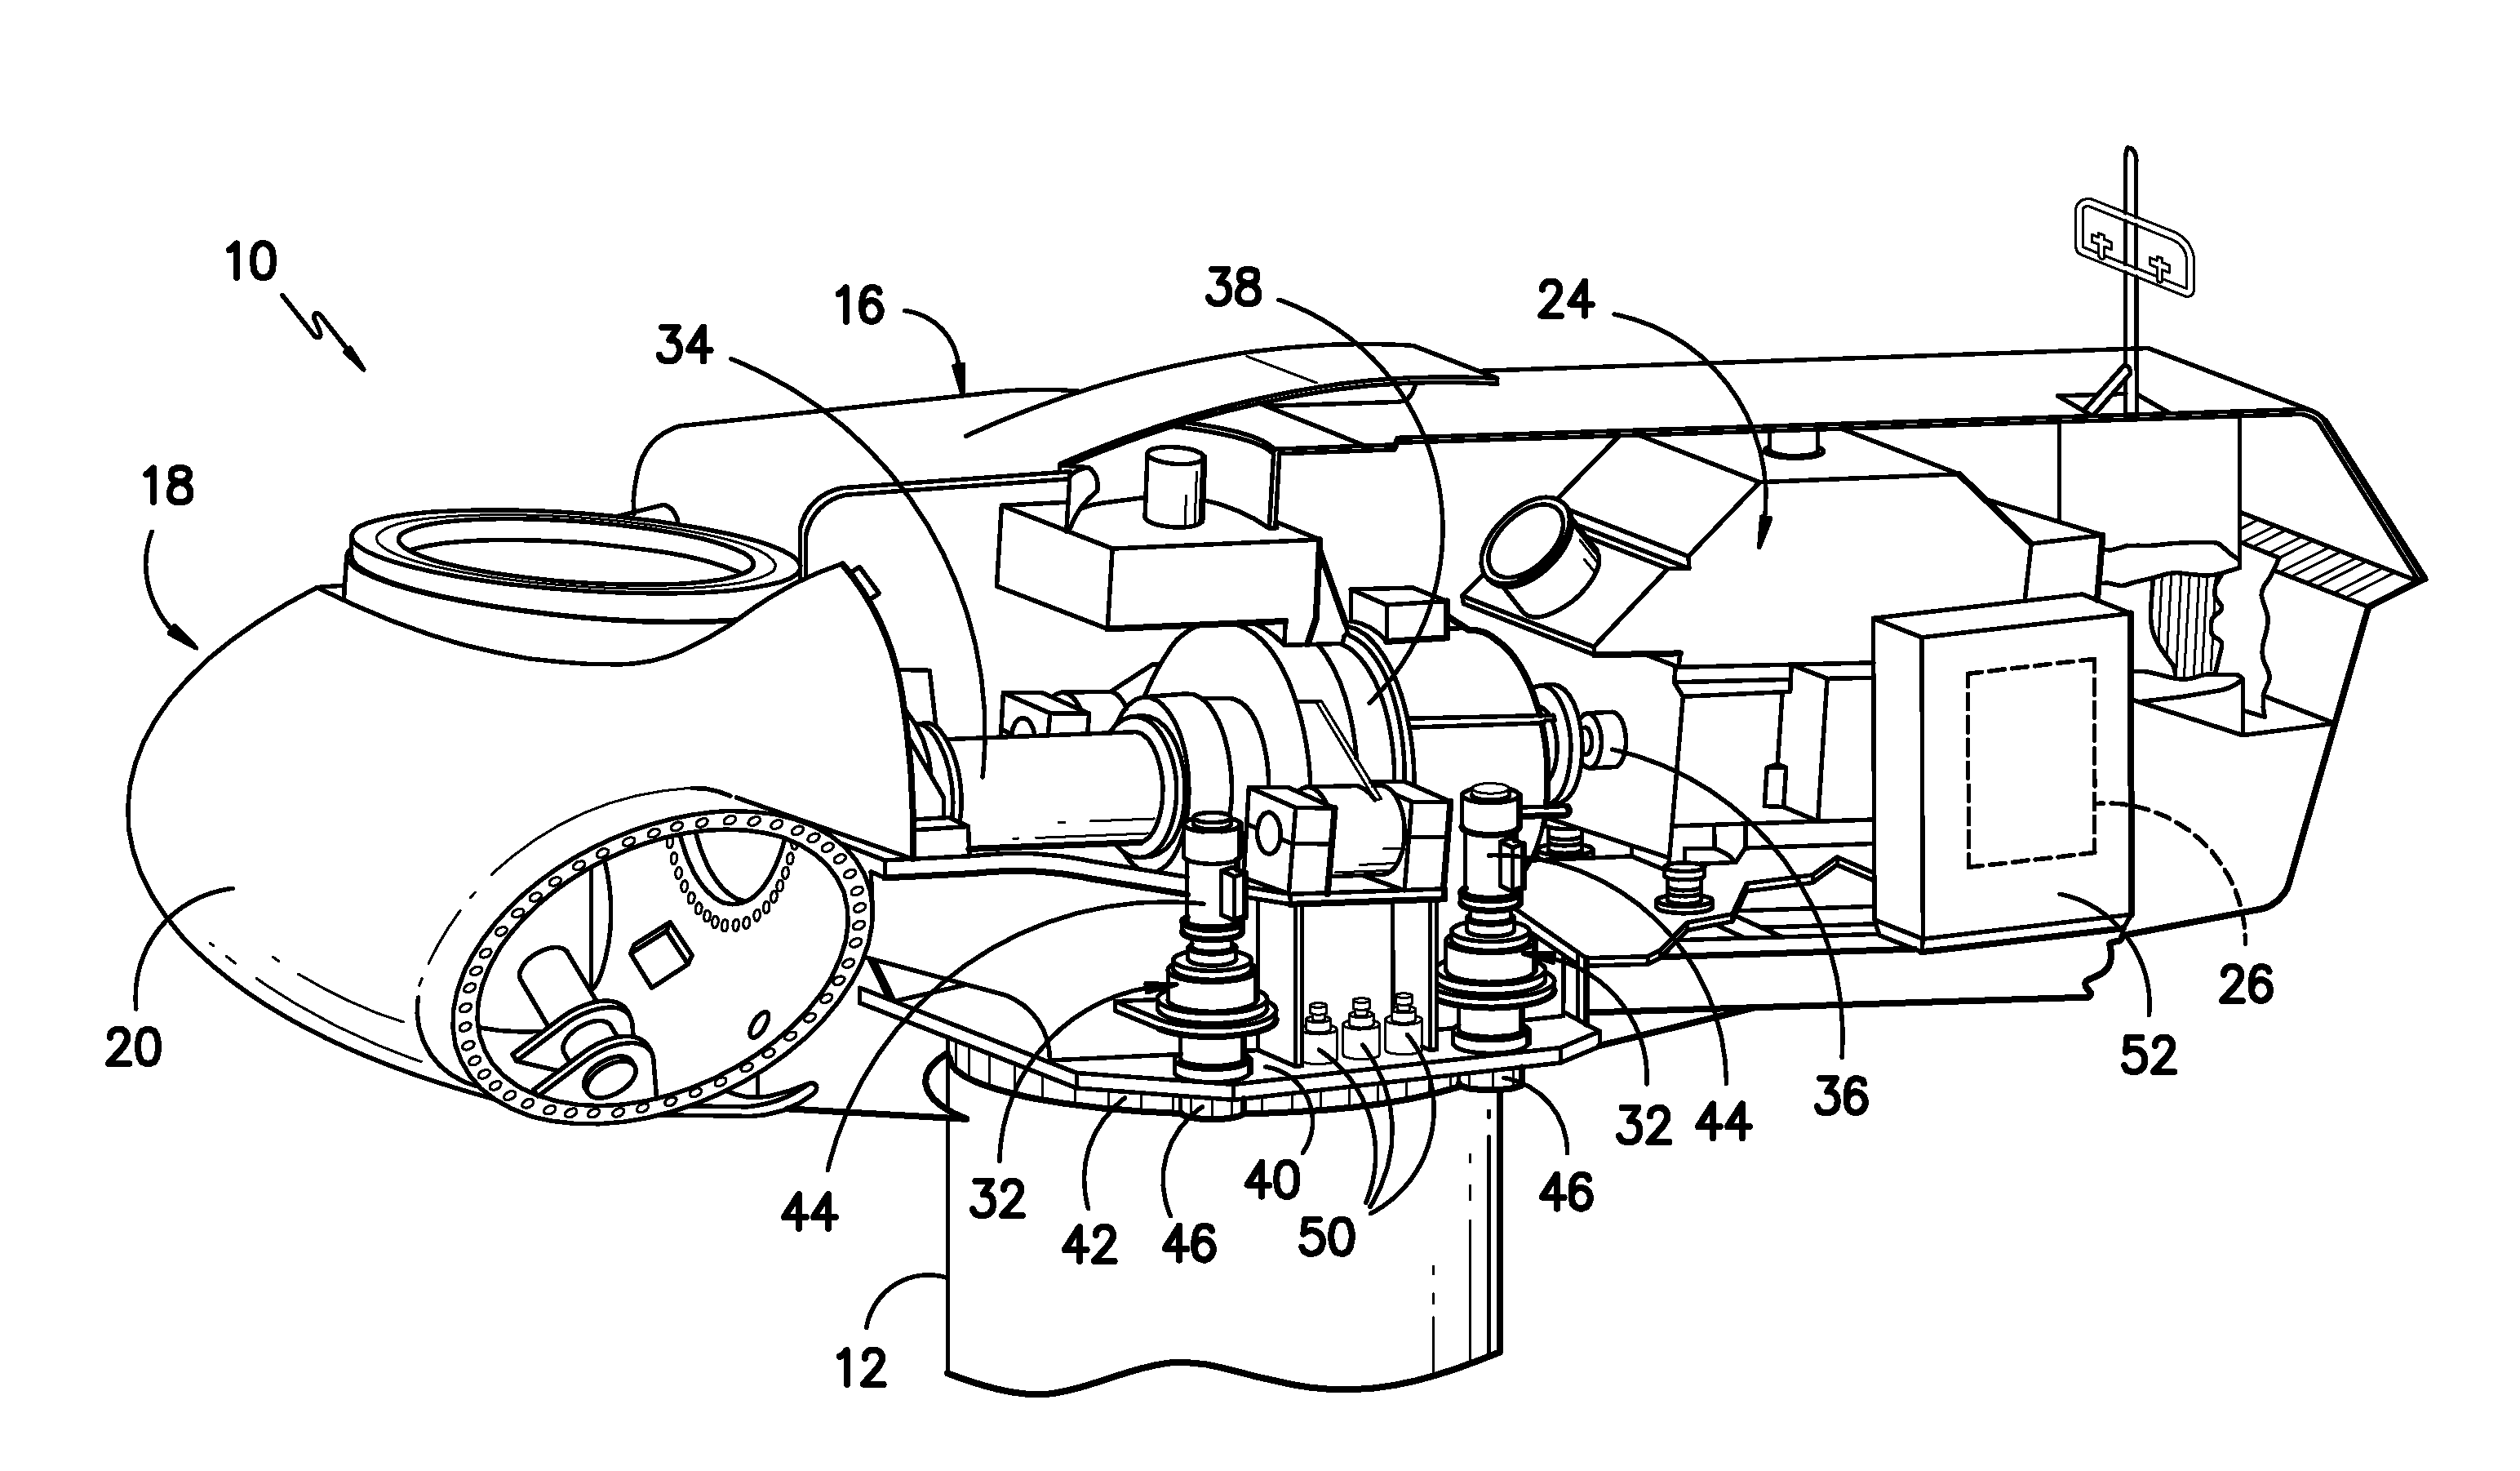 System for actively monitoring wear on wind turbine brake pads and related methods